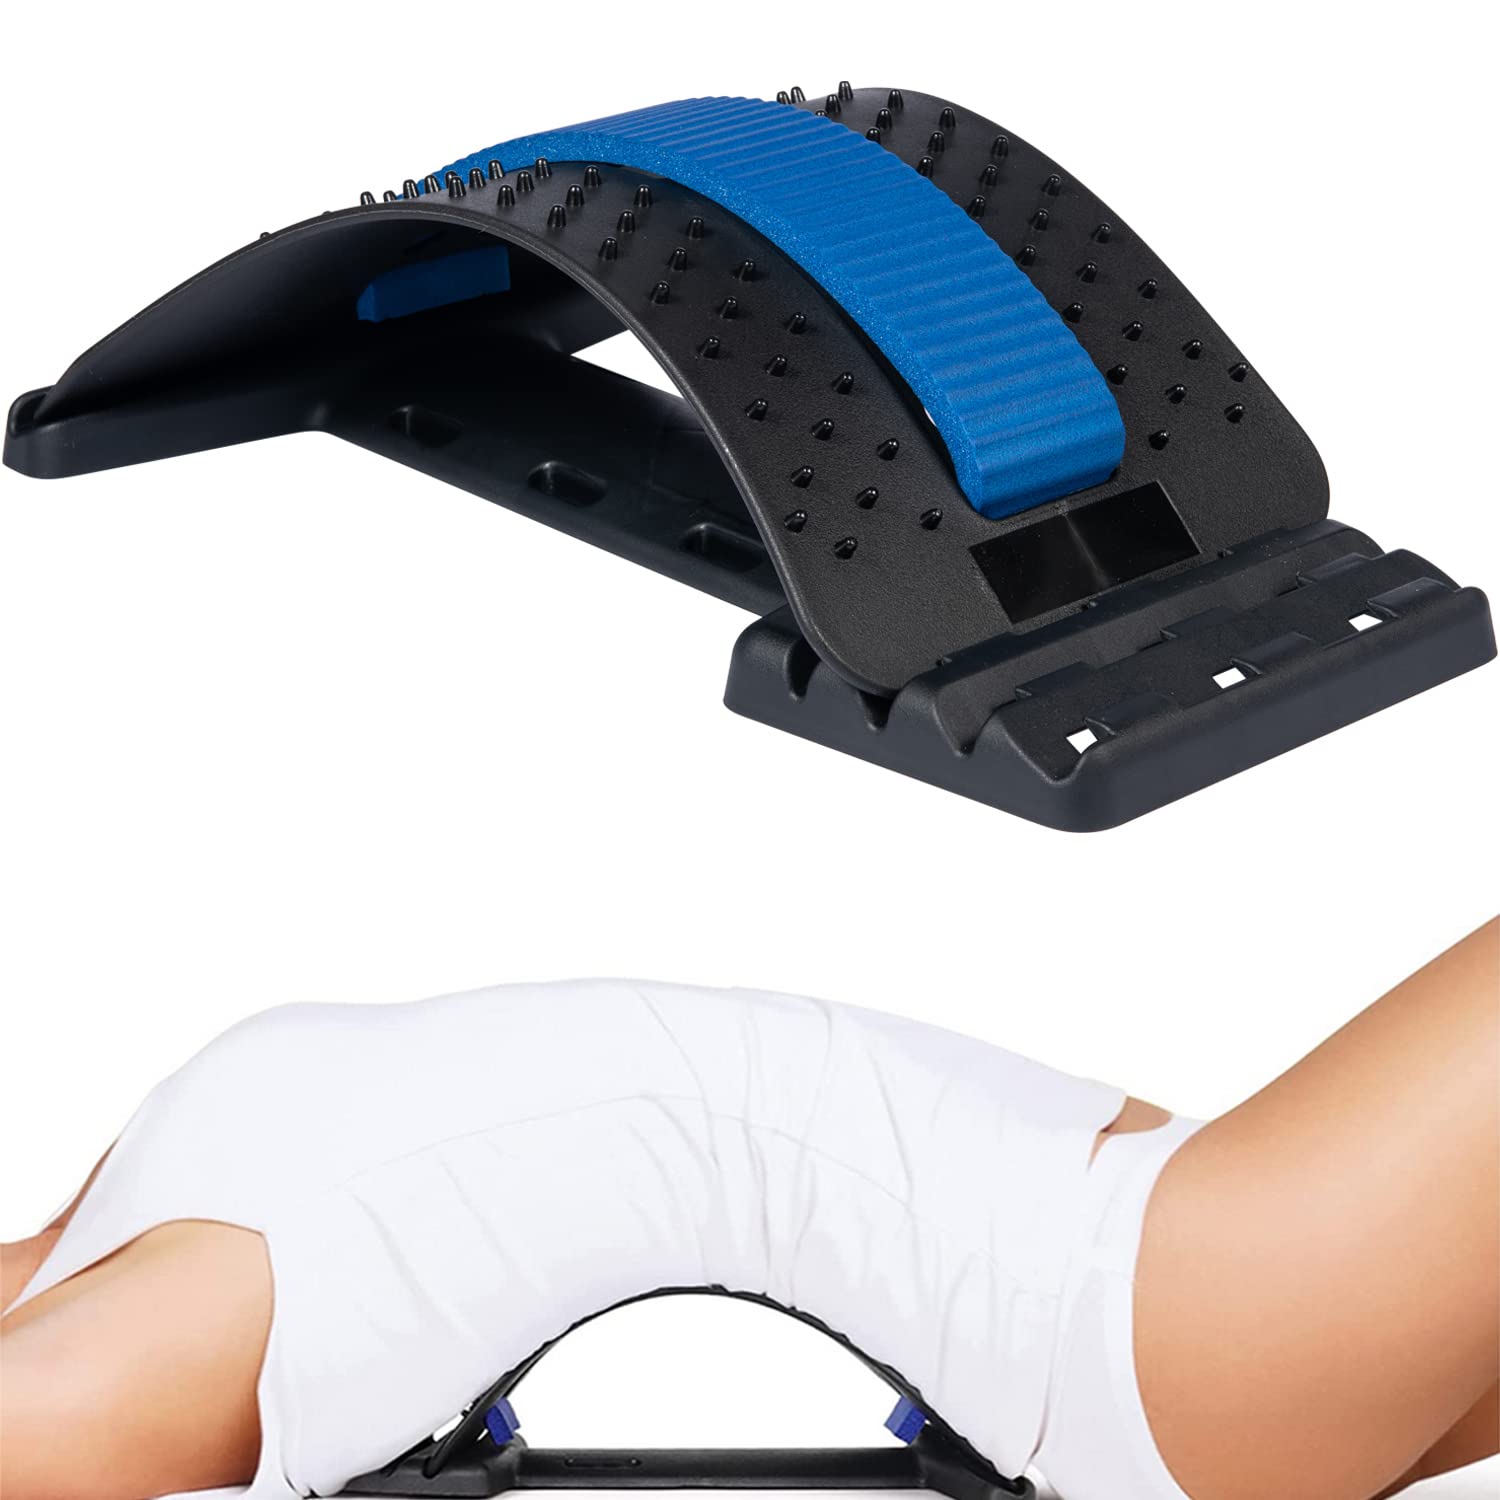 JSB Lumber Massager for Back pain & spine stretching, For Body Relaxation,  Model Name/Number: JSD